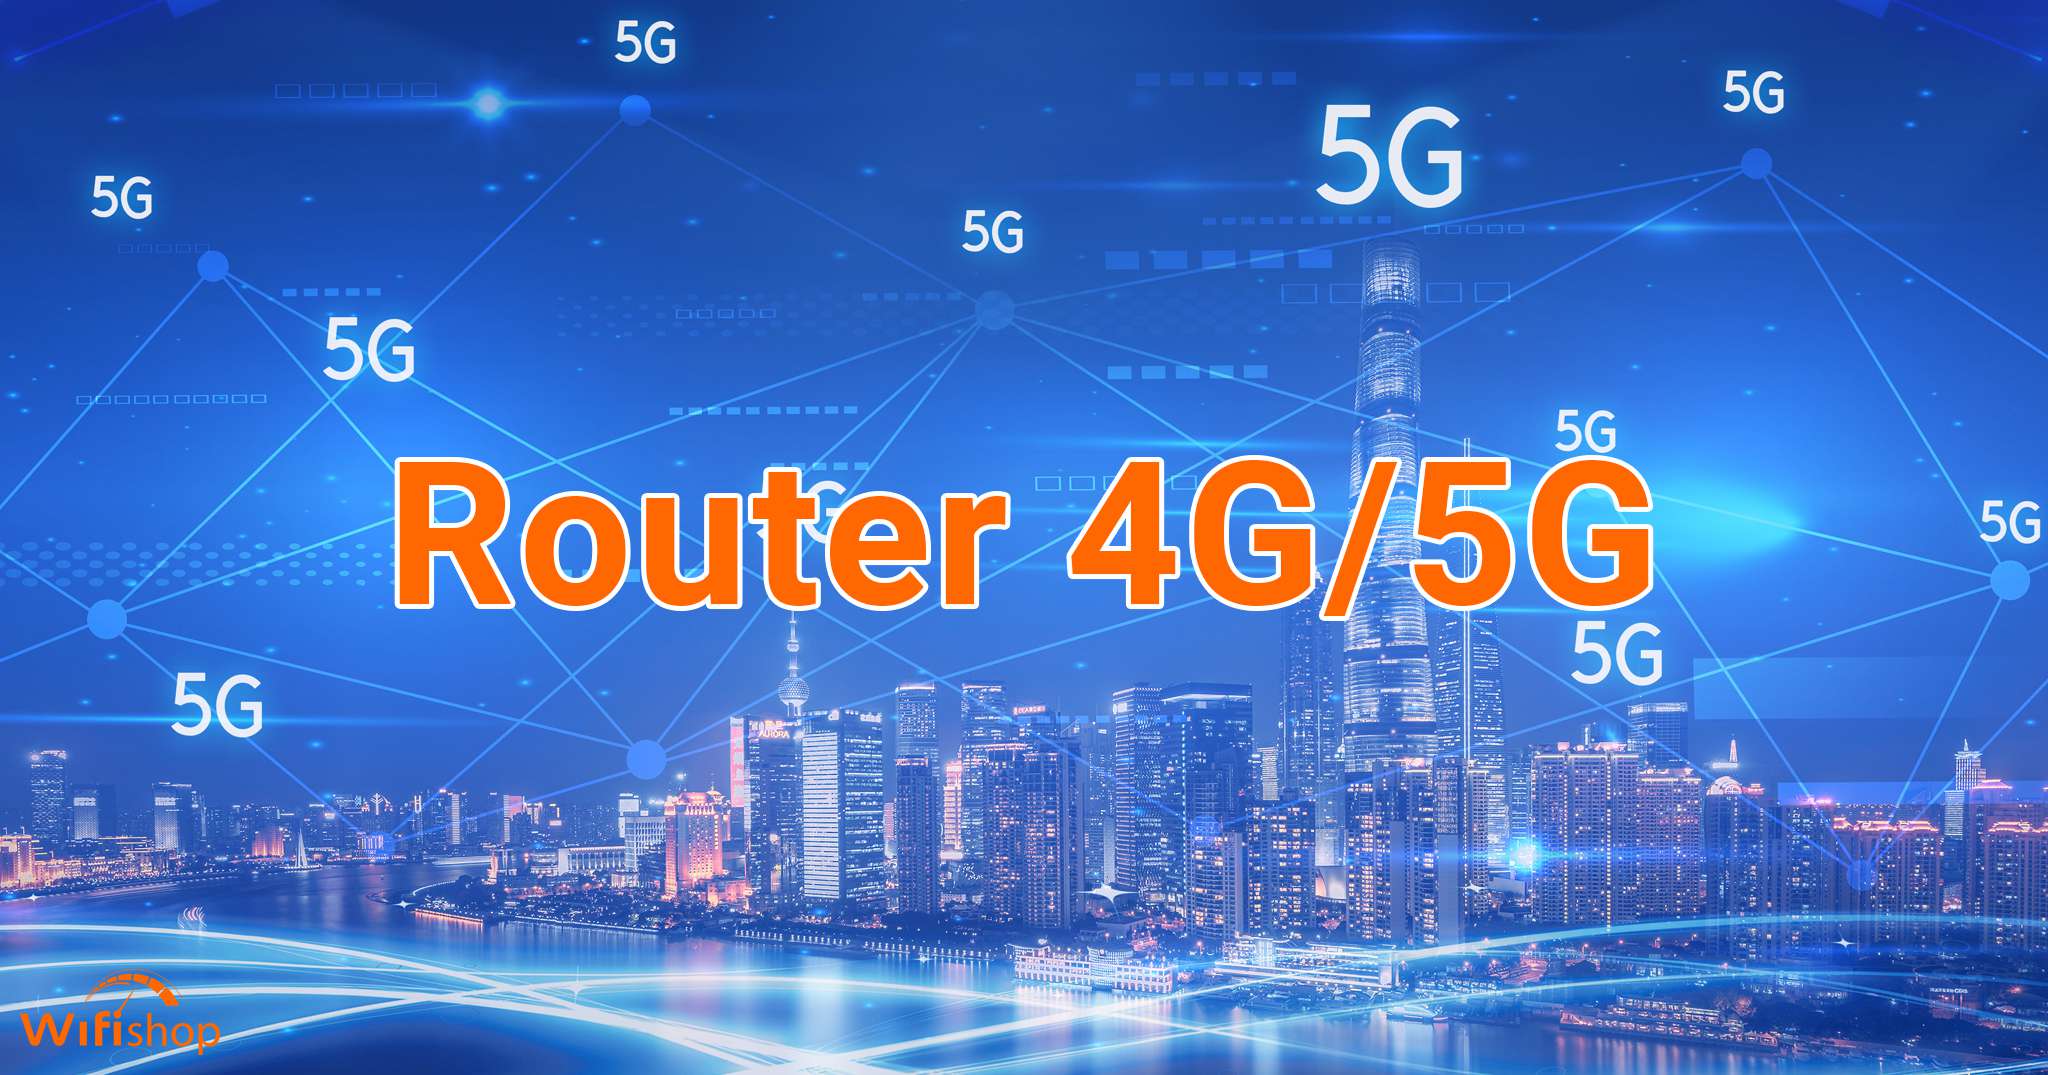 ROUTER 4G/5G